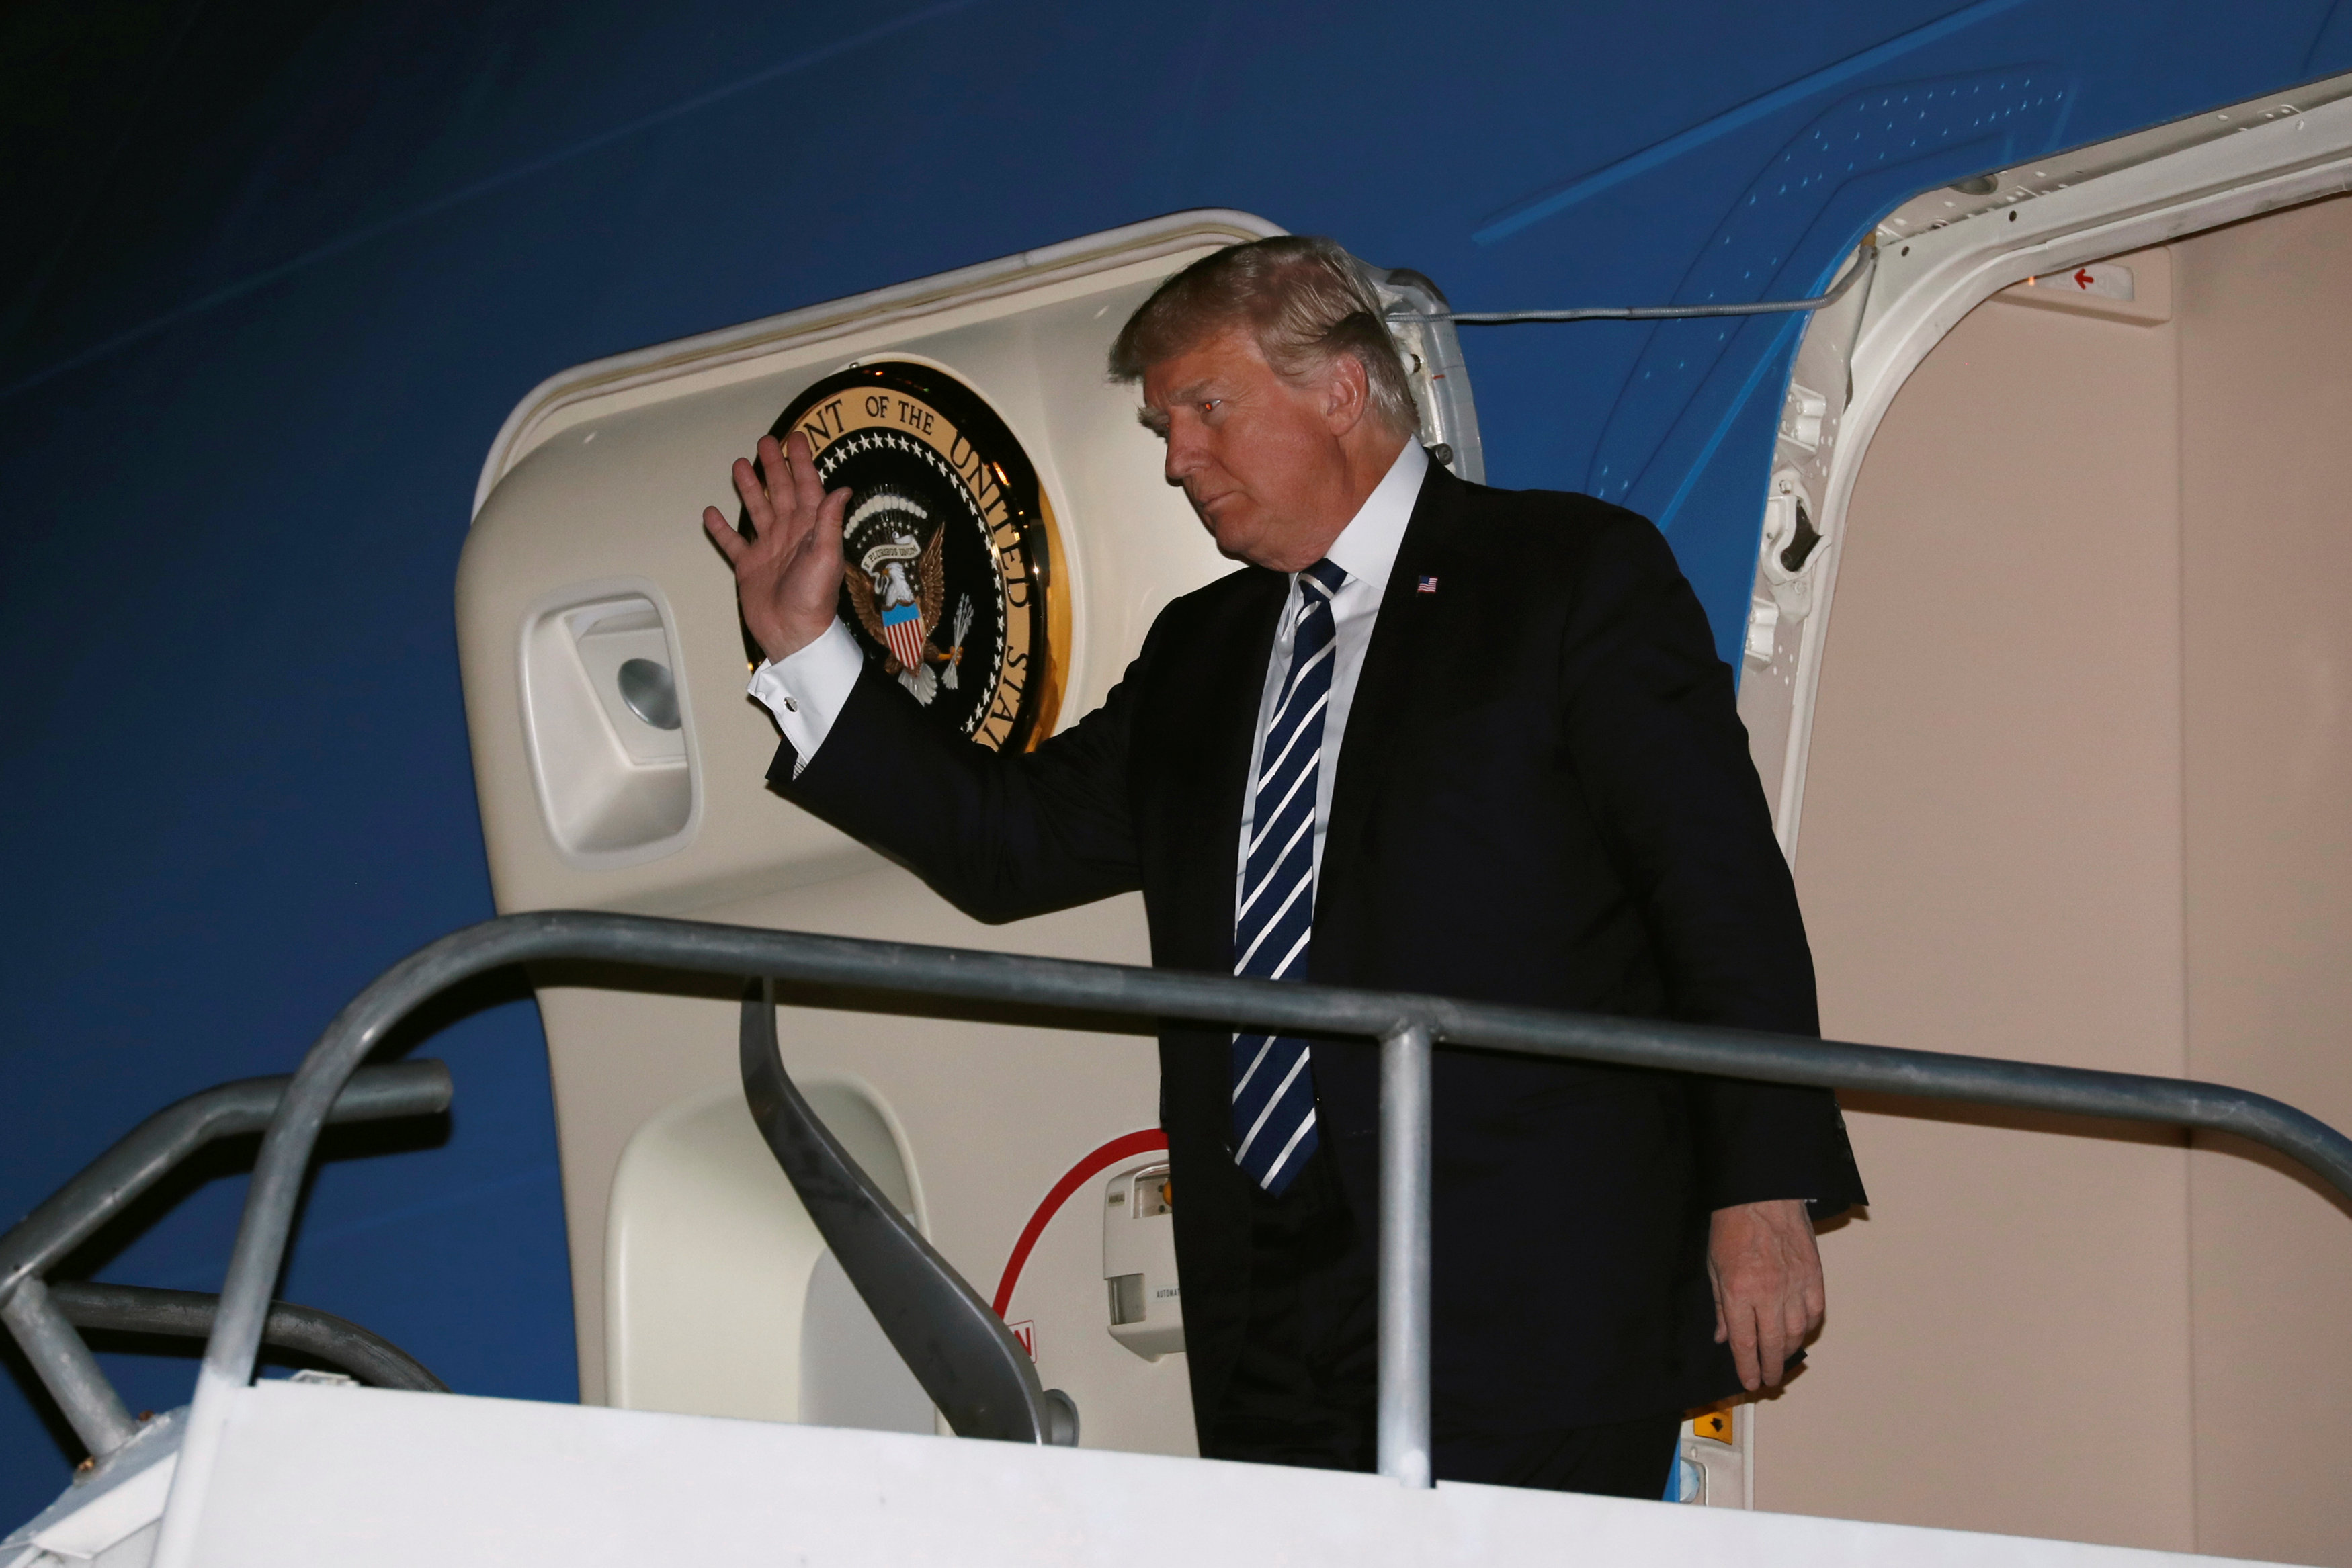 Trump lands in Philippines, offers to mediate on South China Sea